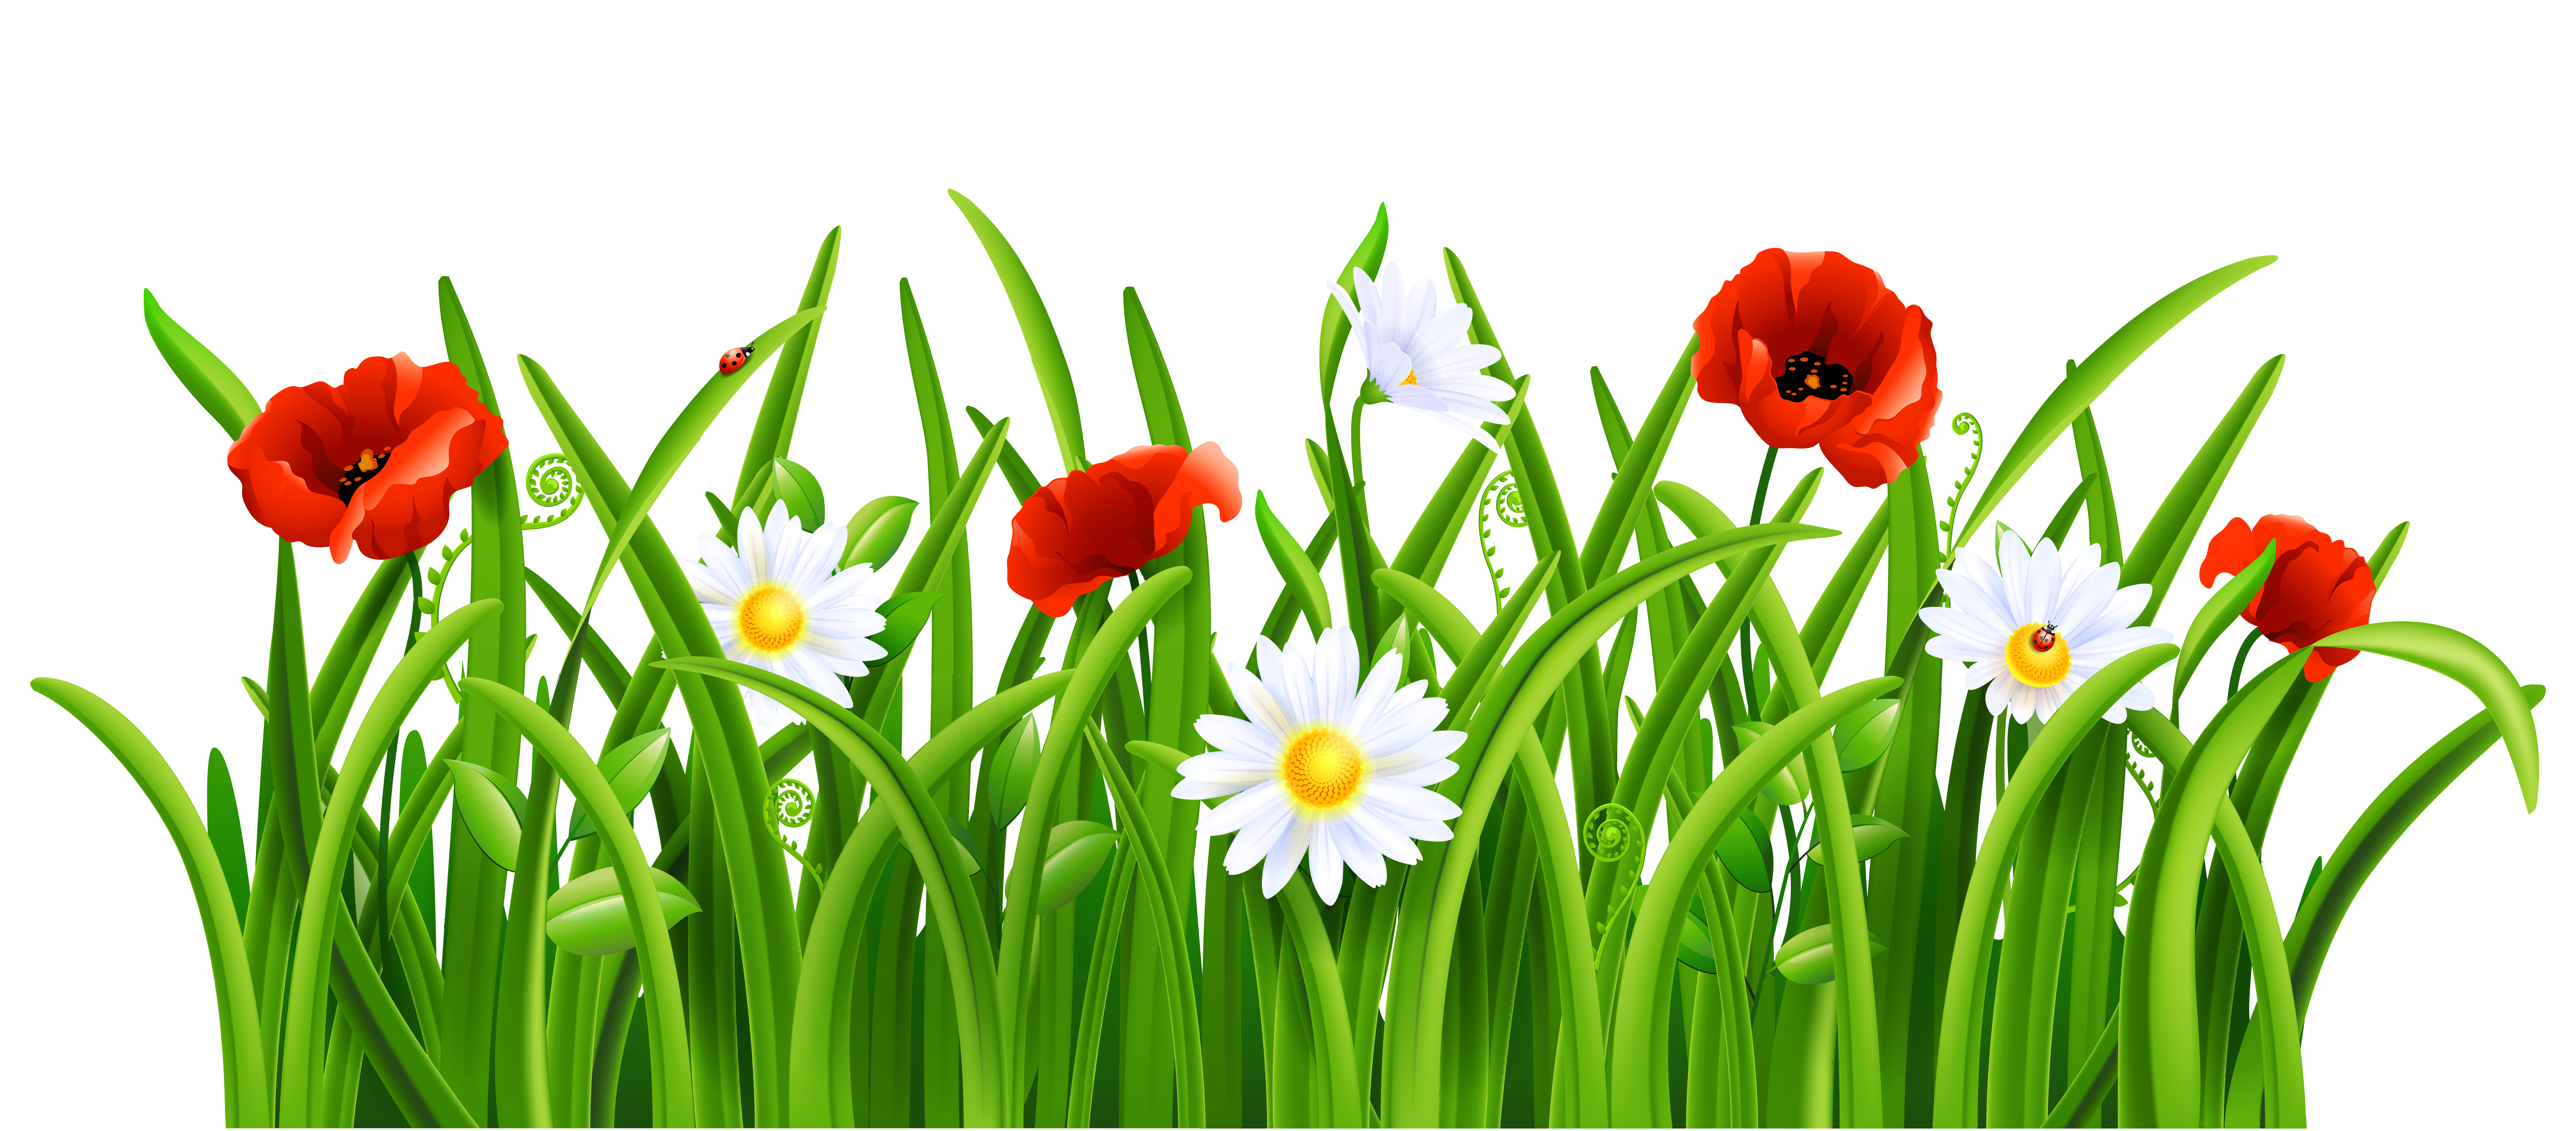 Poppies and daisies with. Daisy clipart high grass